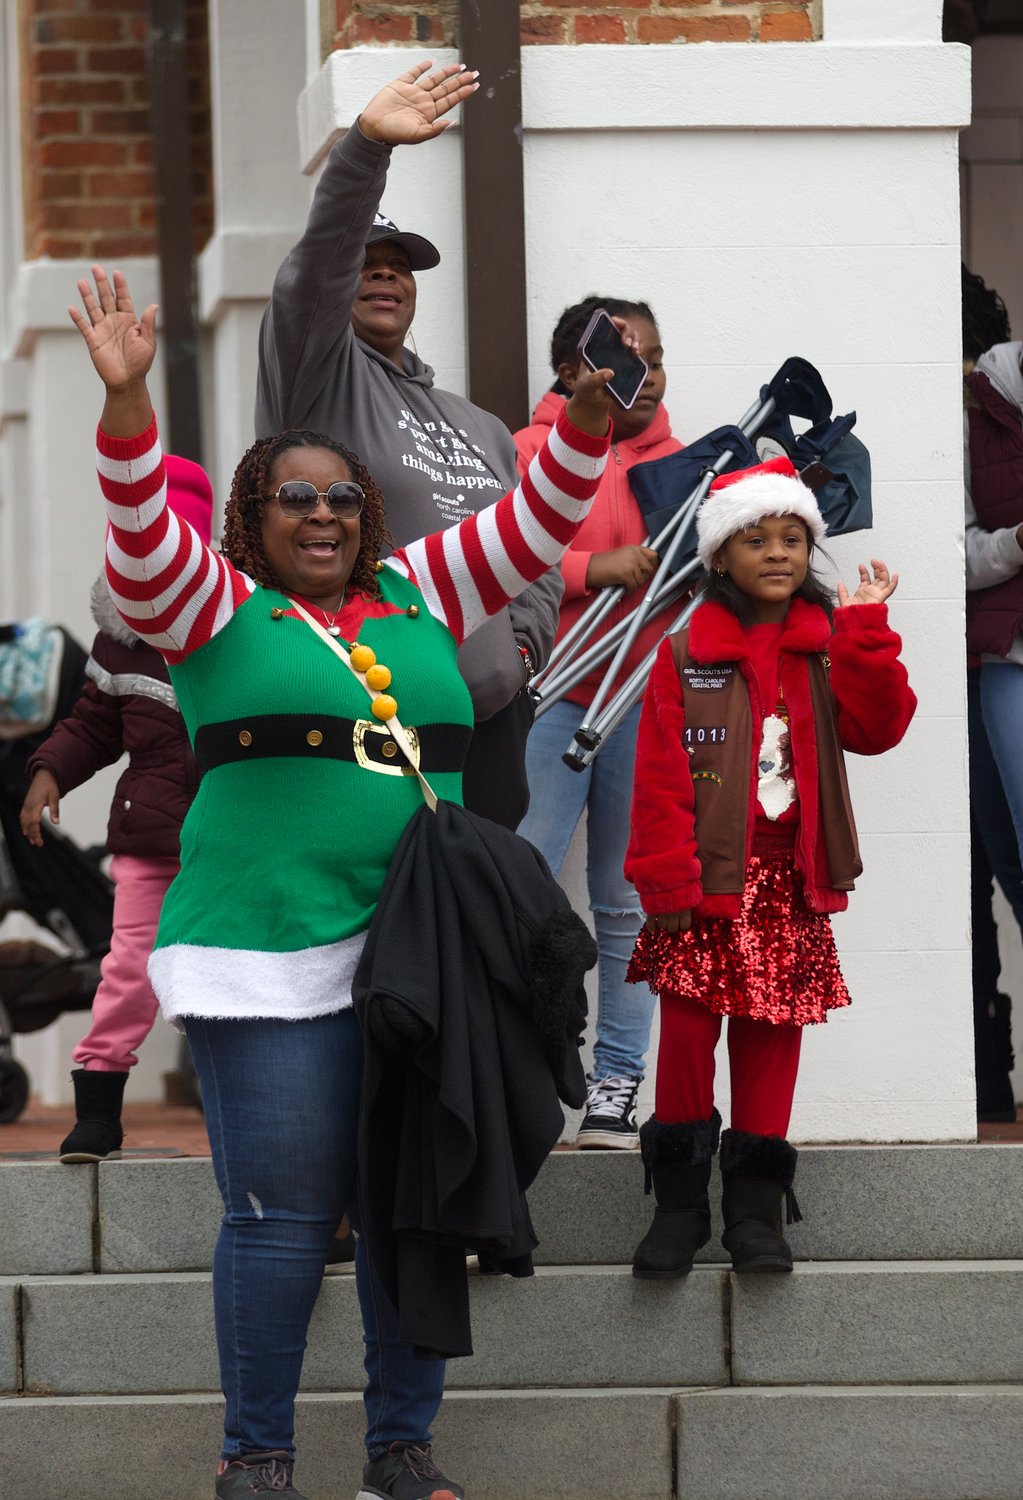 People wave as the Fayetteville Rotary Christmas Parade moves through downtown Fayetteville on Saturday.